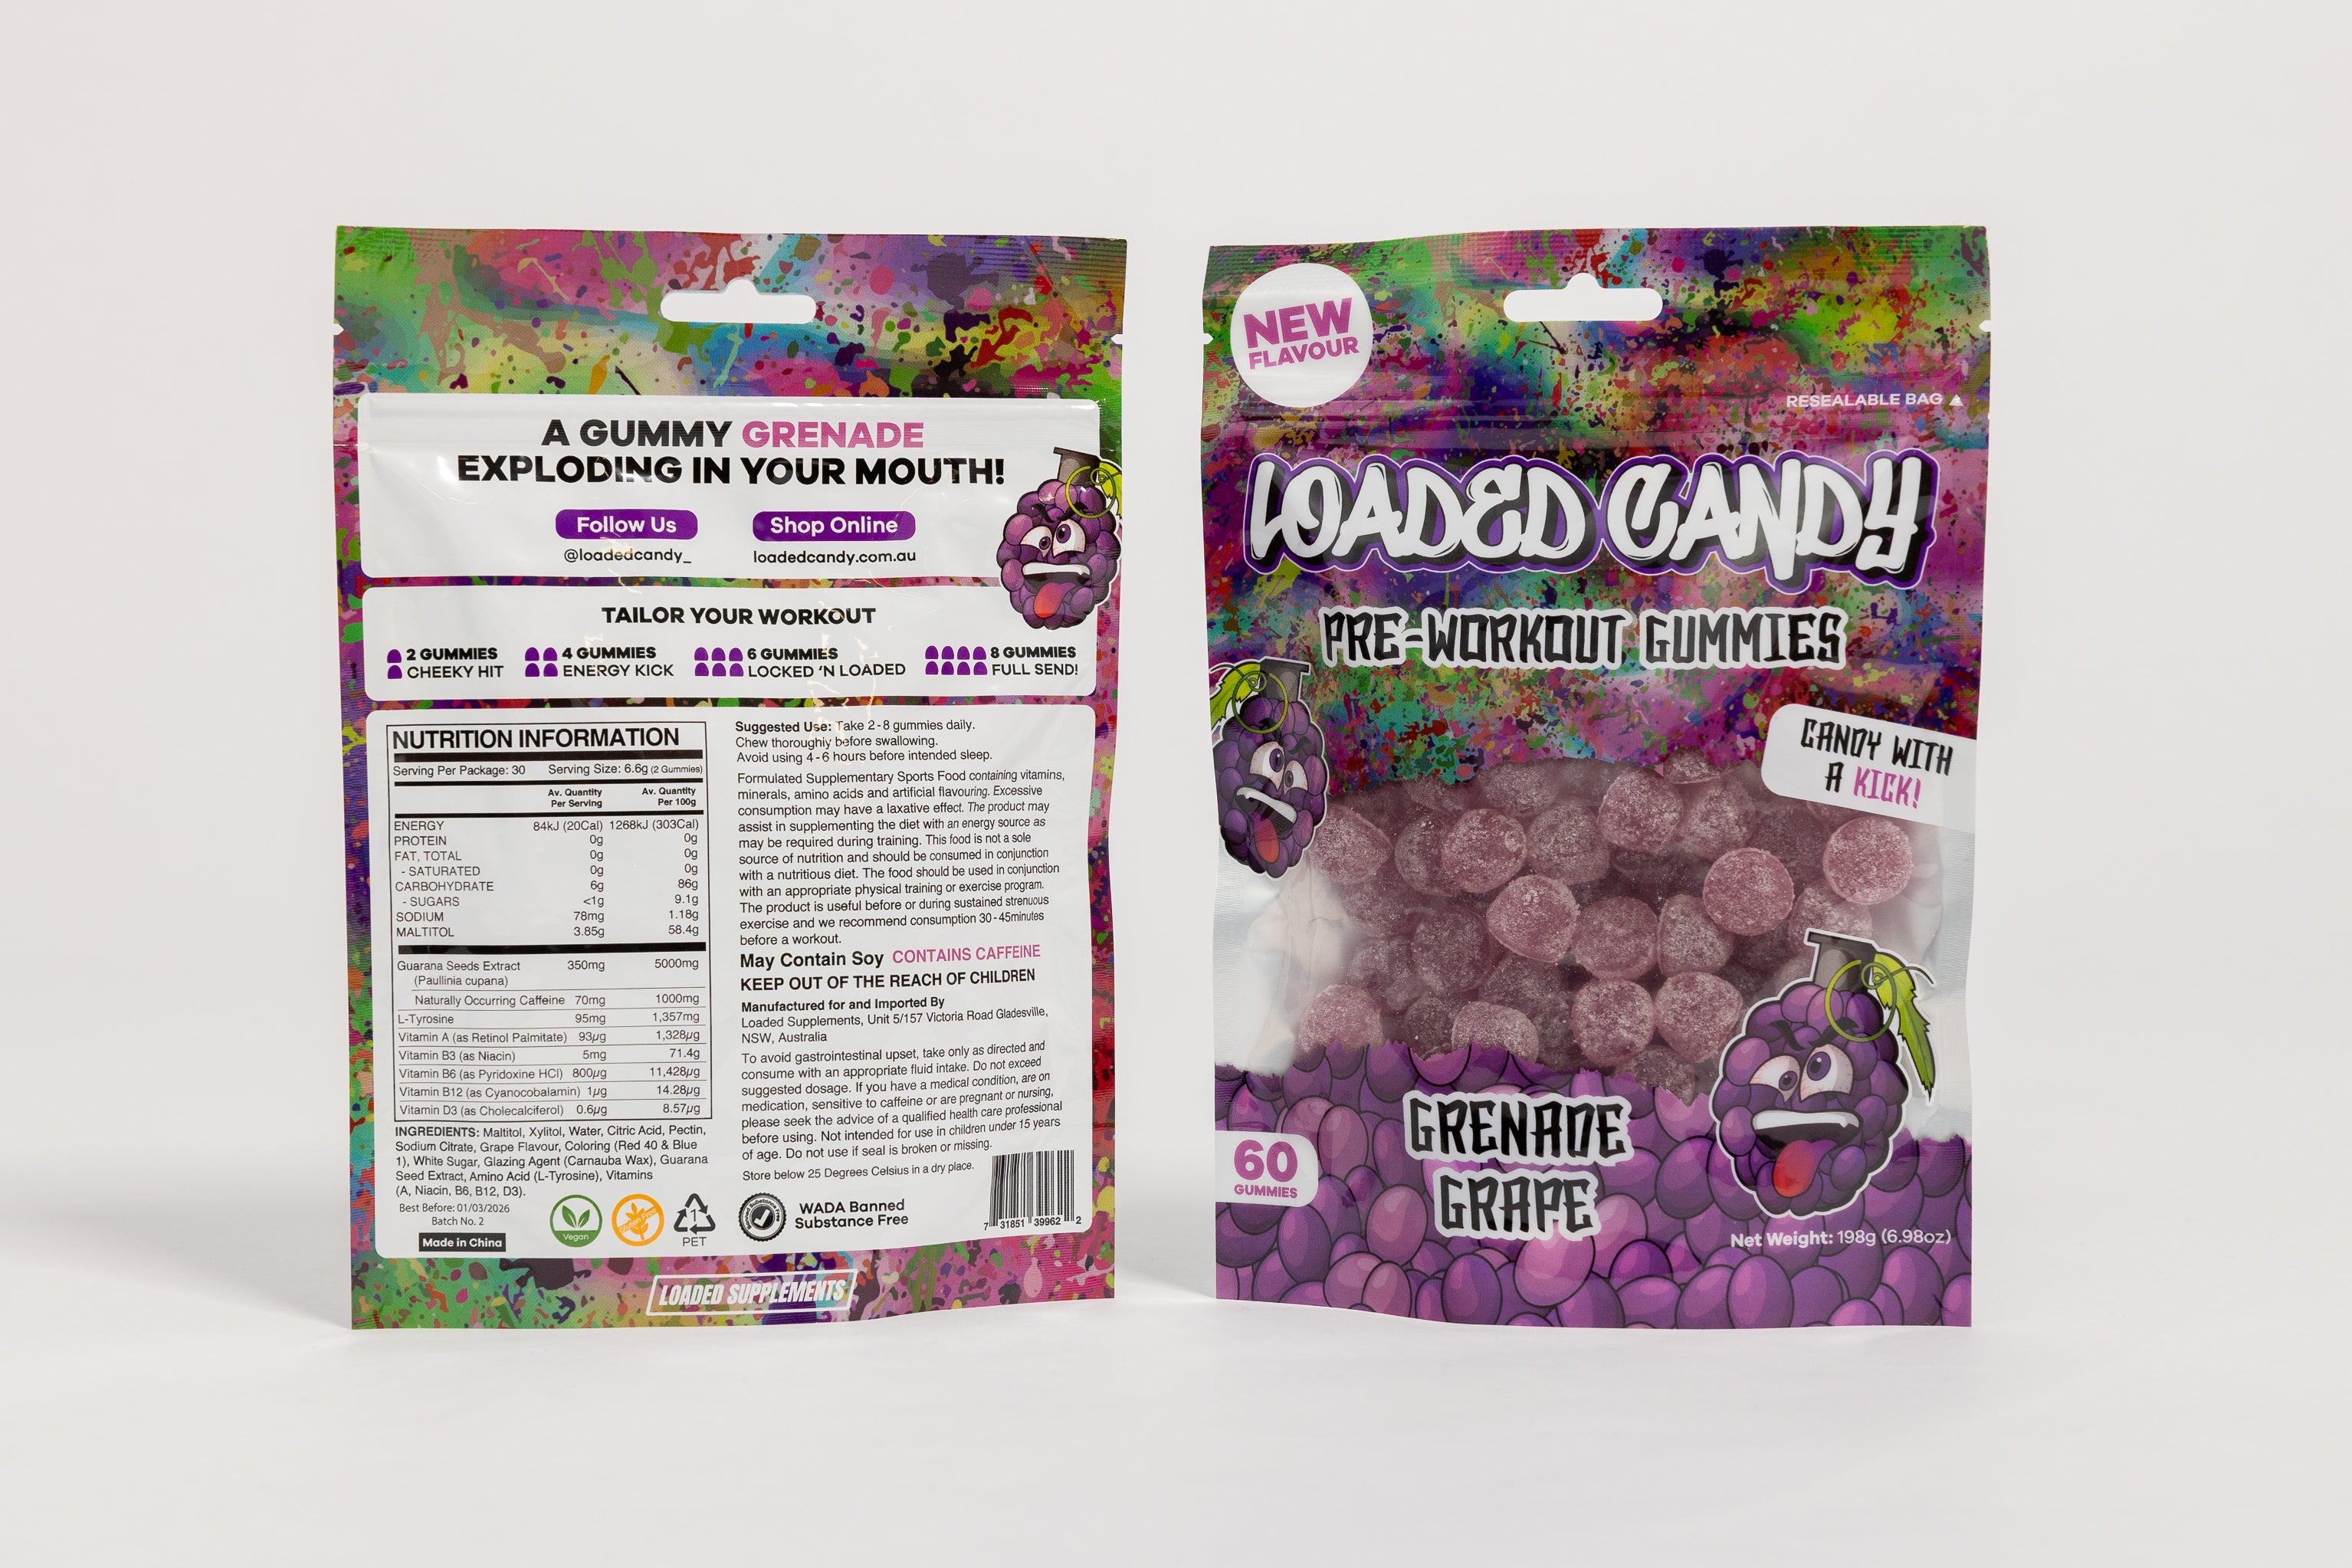 Grenade Grape & Send It Strawberry Pre-Workout Gummy (DUO PACK)